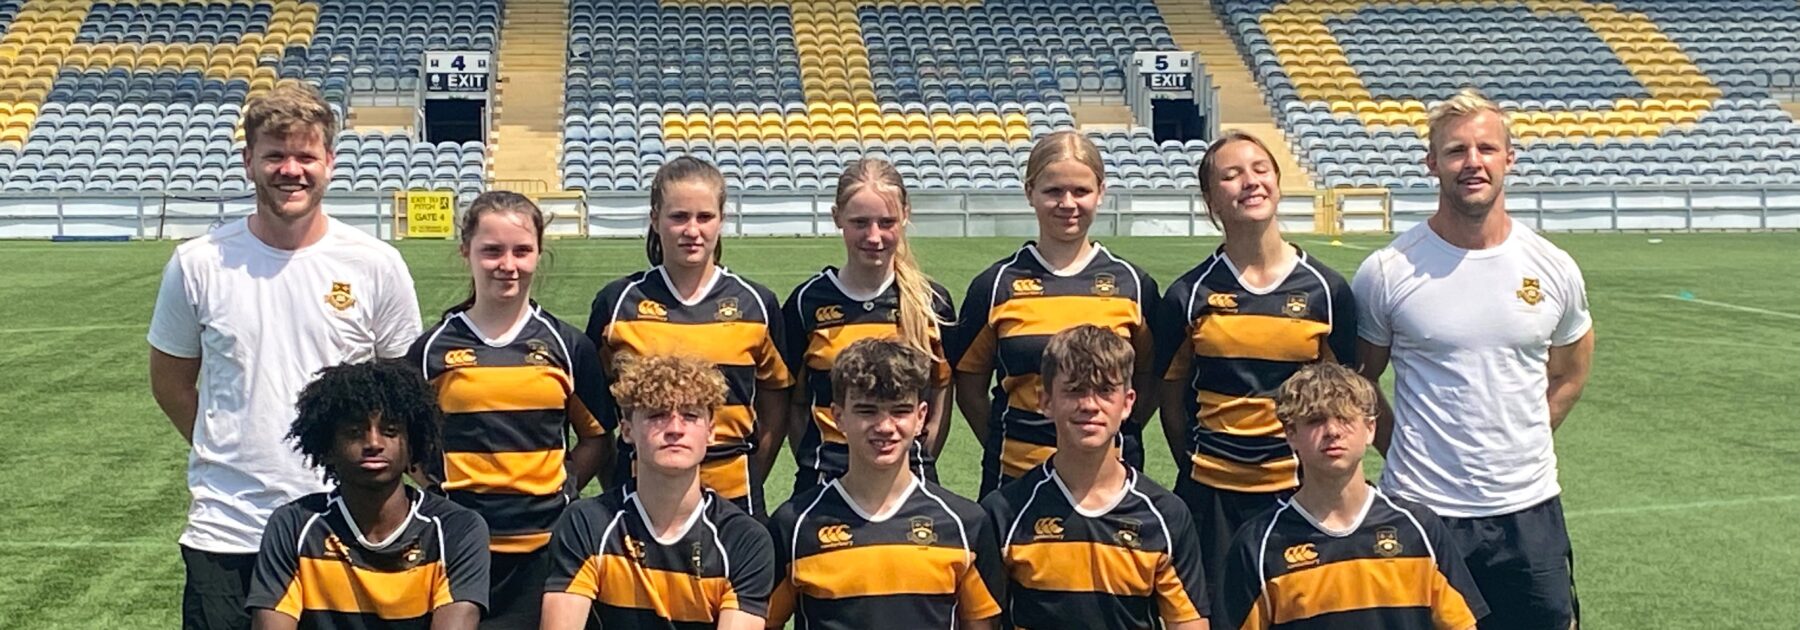 Caterham U14 Mixed Touch team crowned National Champions